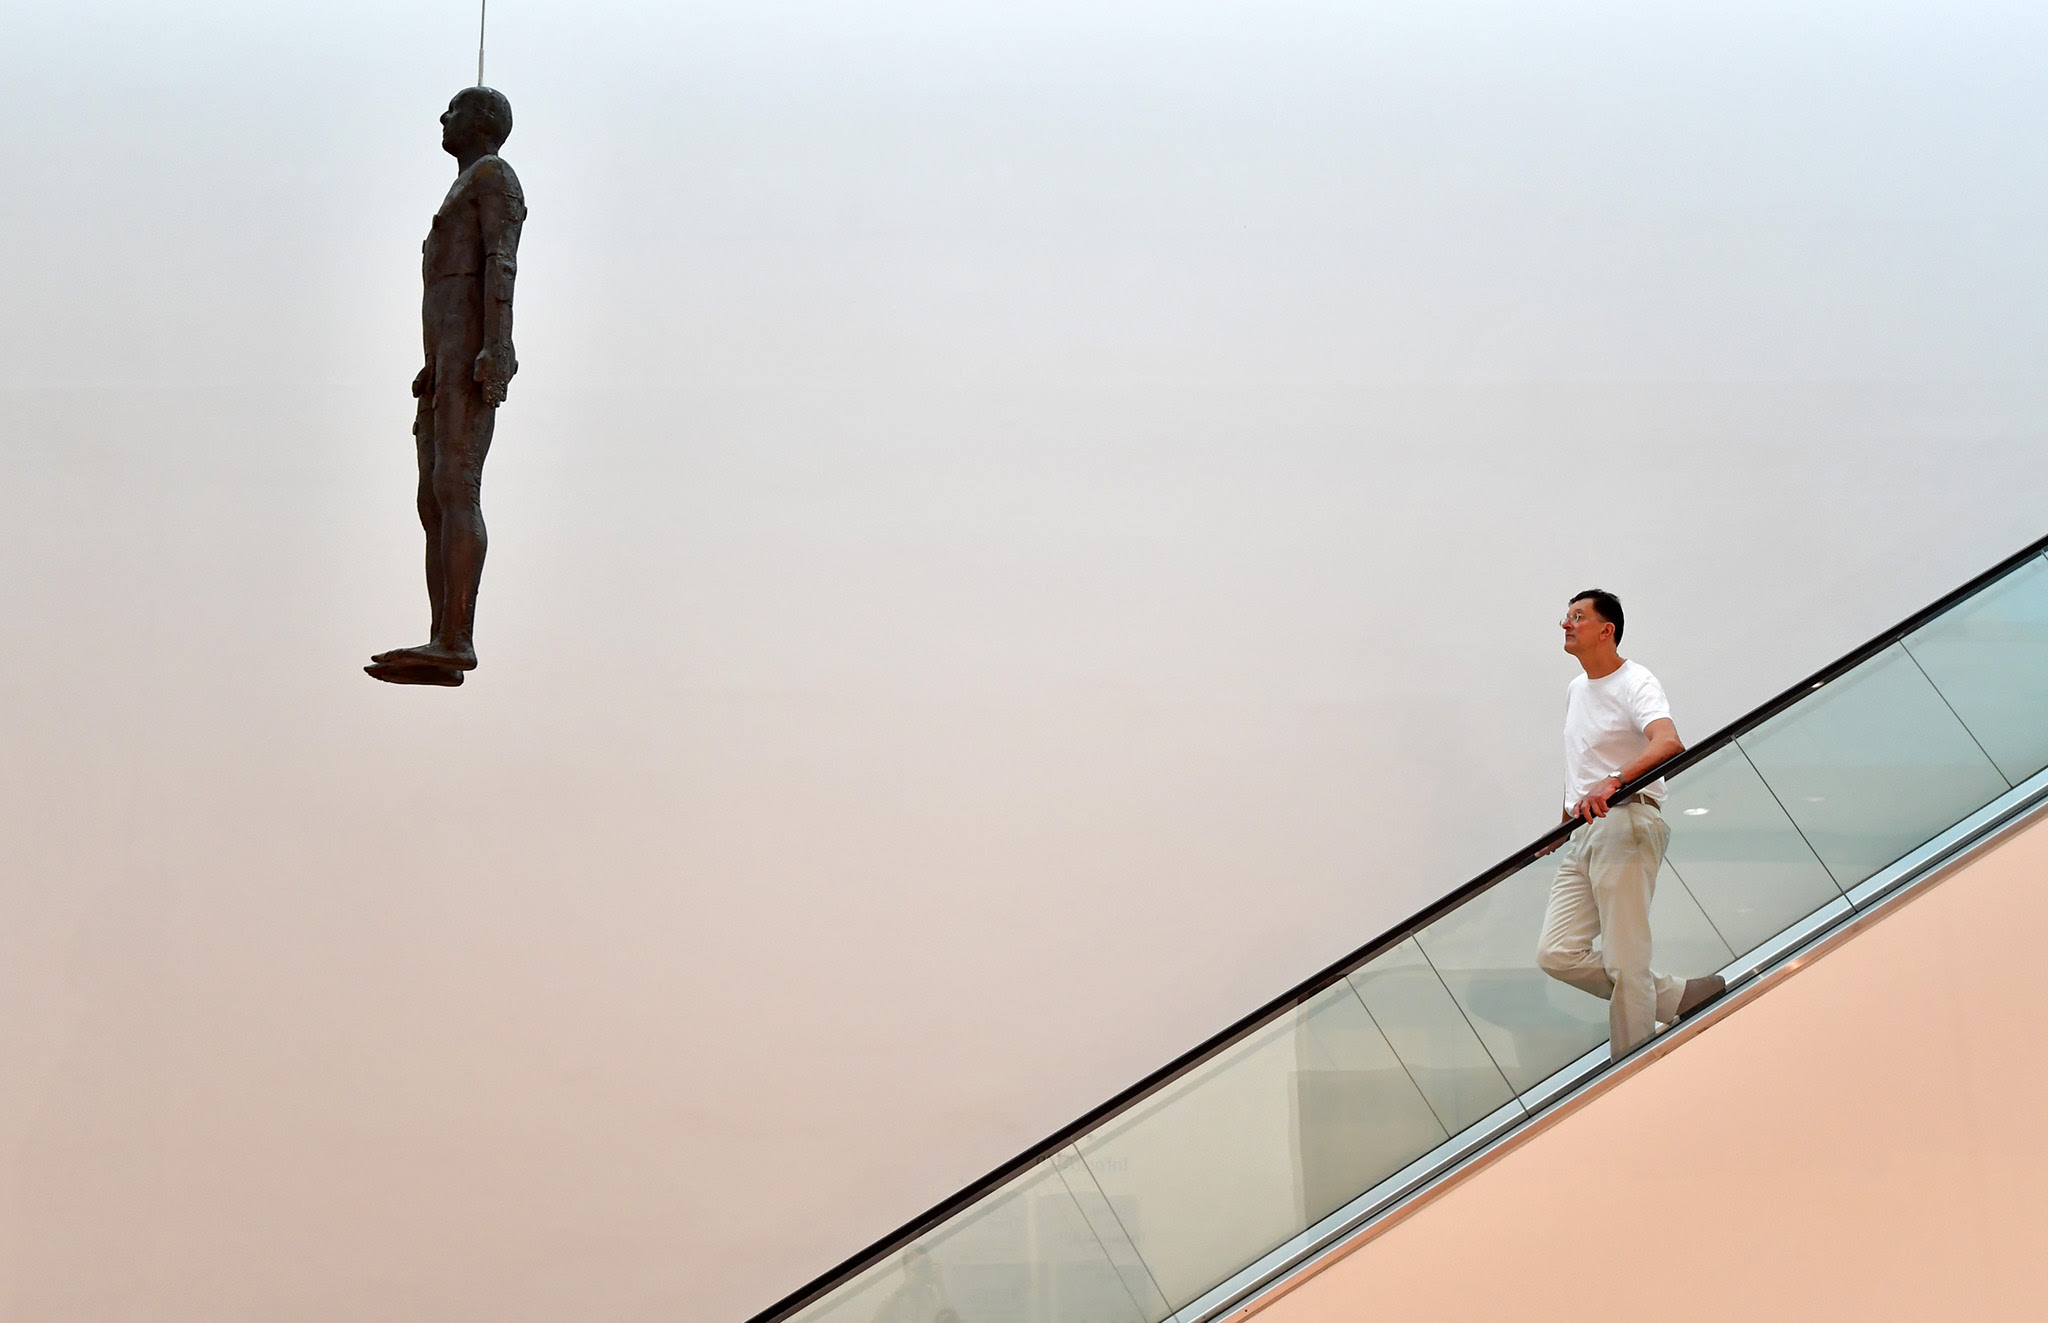 British artist Anthony Gormley poses for a photograph next to his artwork entitled 'Object, 199', a life-size cast-iron sculpture cast from the artist's body and hung from the ceiling of the National Portrait Gallery, during a press preview on September 7, 2016 in London, England. The work is accompanied on October 5 by 'Fall, 1999', a selection of drawings also by Mr Gormley.  (Photo by Carl Court/Getty Images)